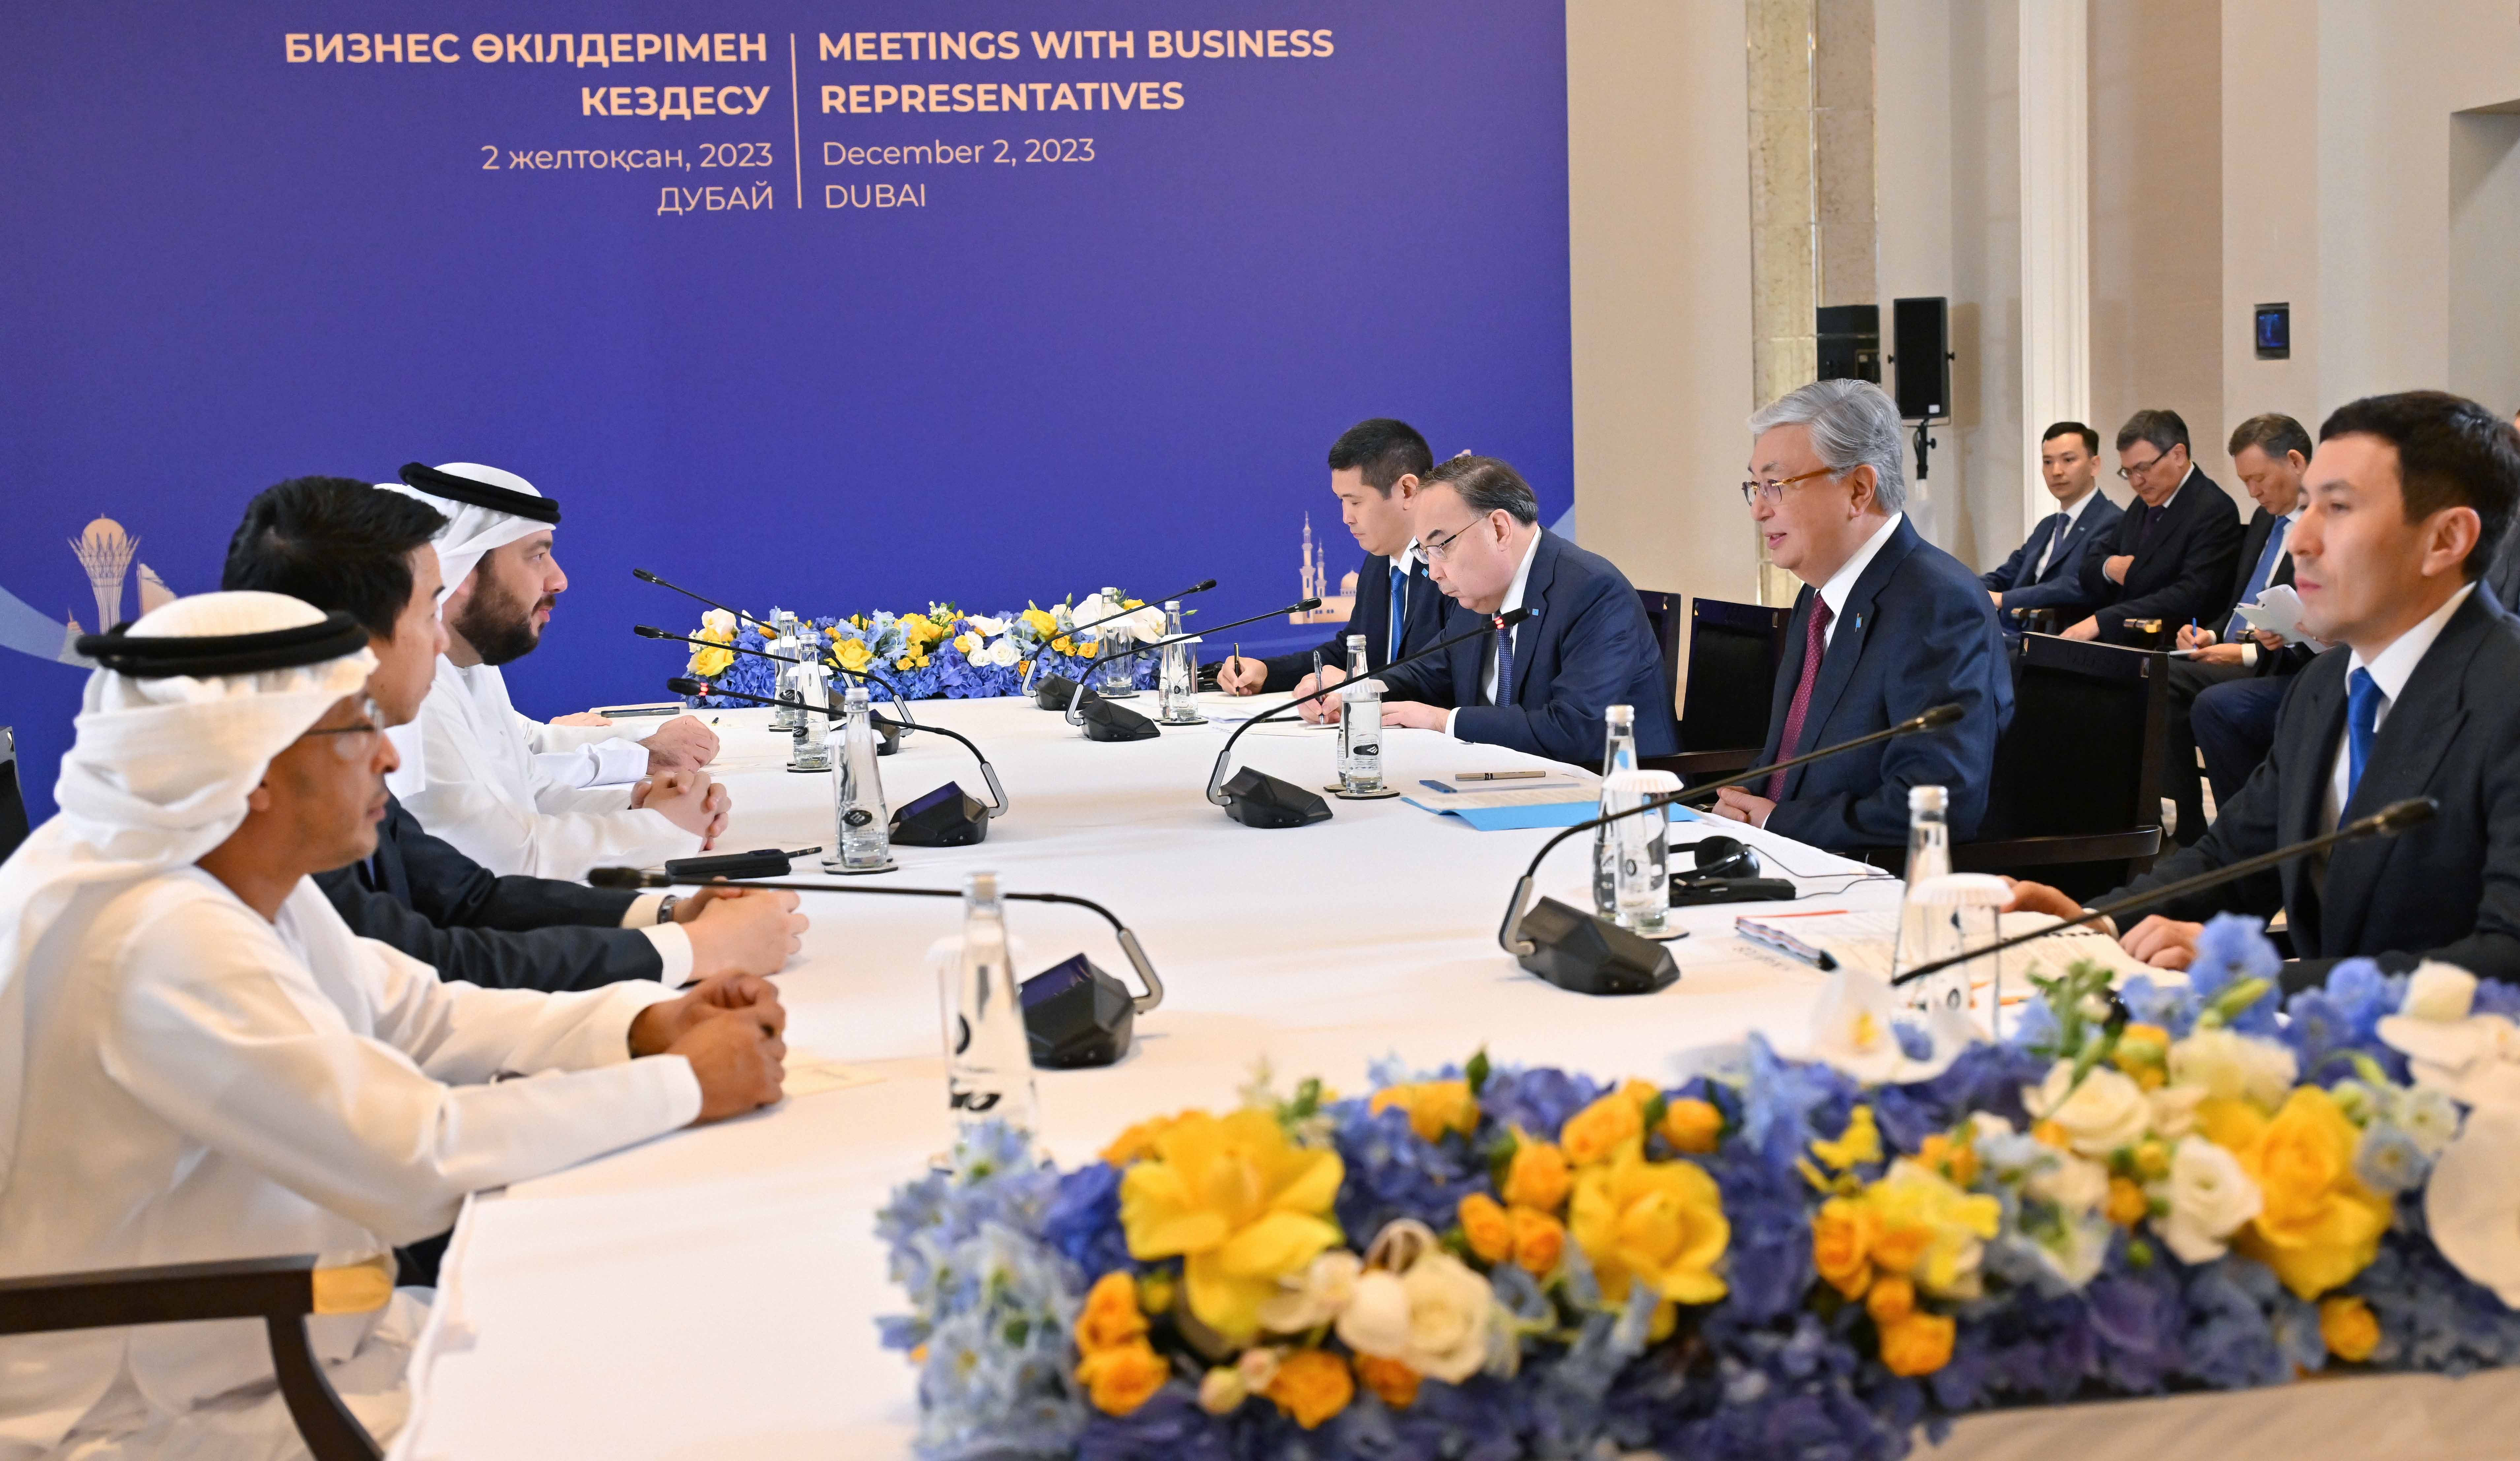 Kazakhstan and UAE strengthen investment ties for green energy and AI advancements  